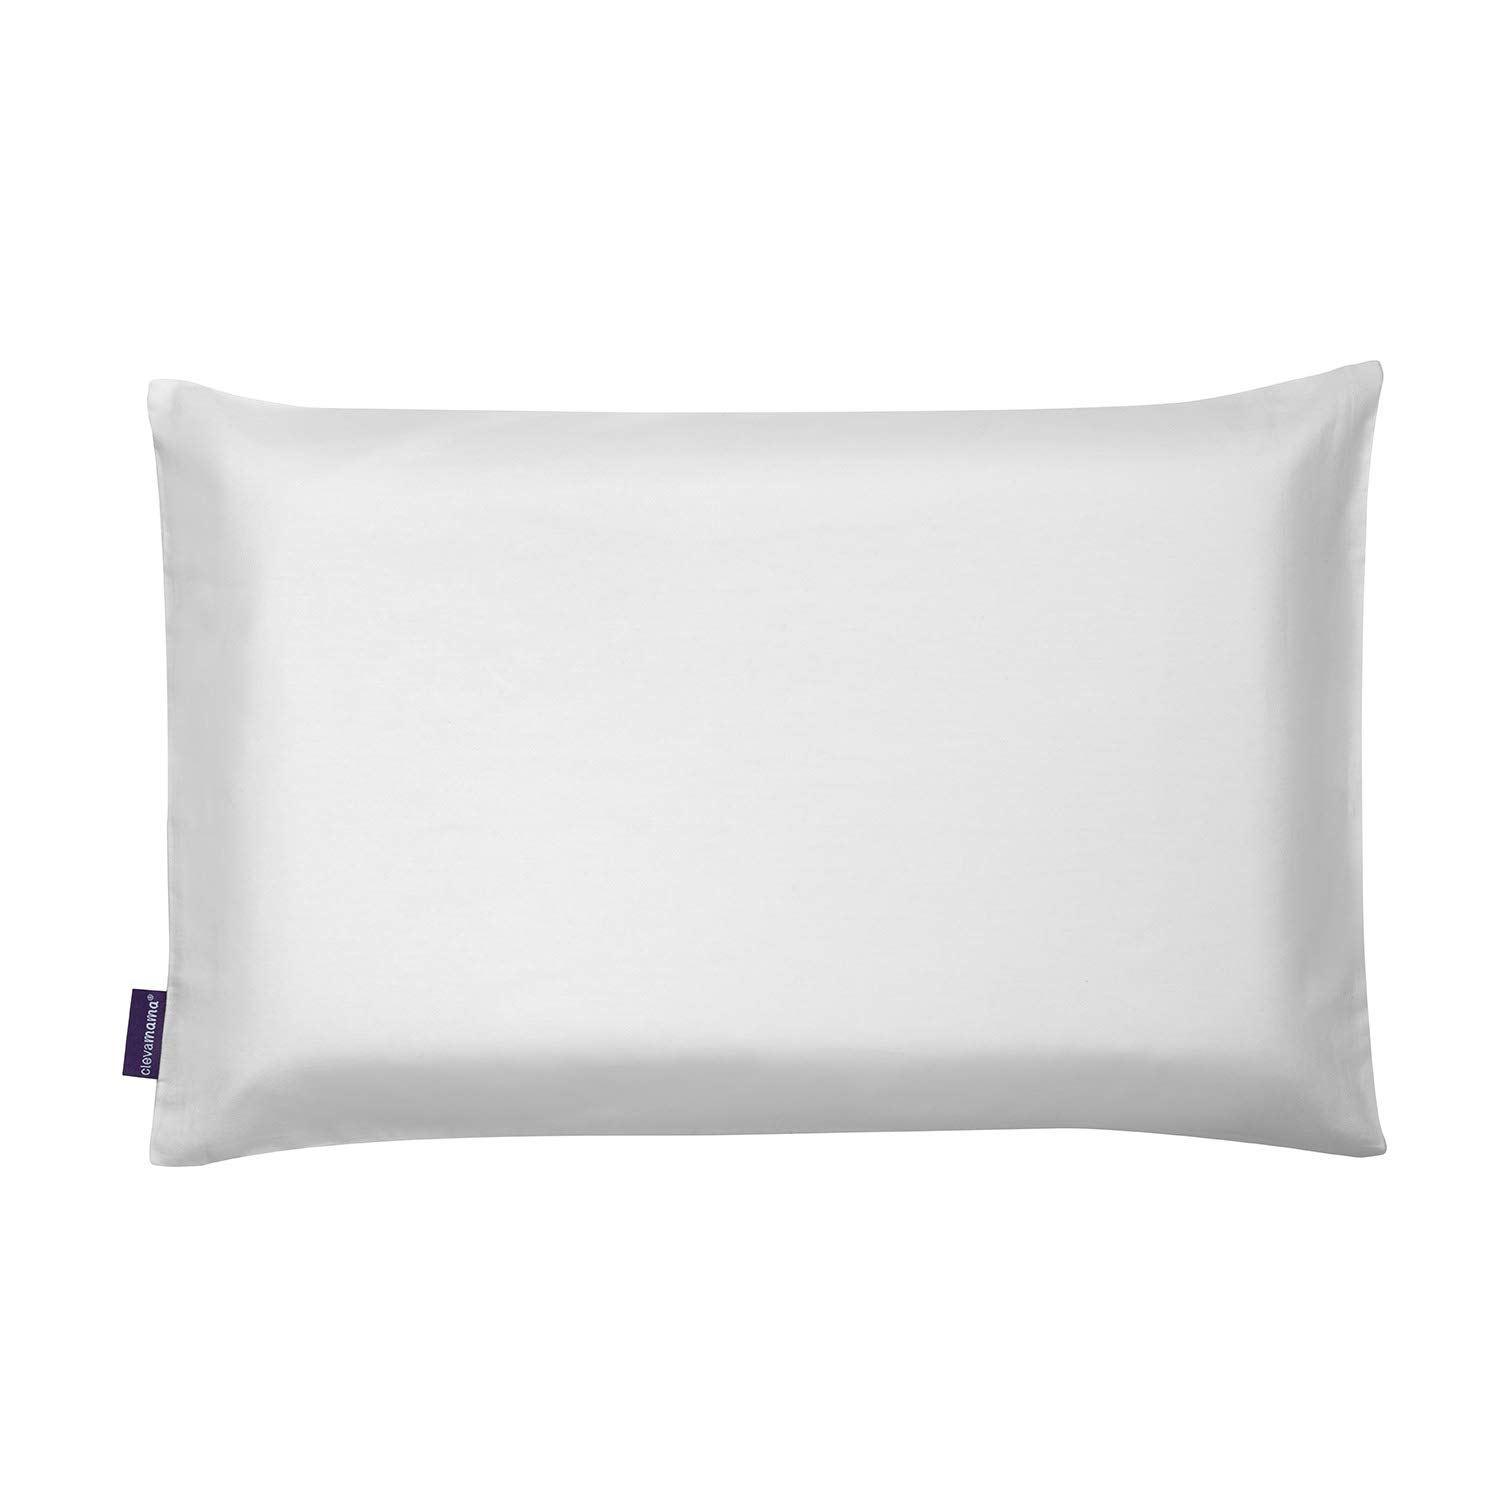 Clevamama 100% Cotton White Replacement Baby Pillow Case 590g